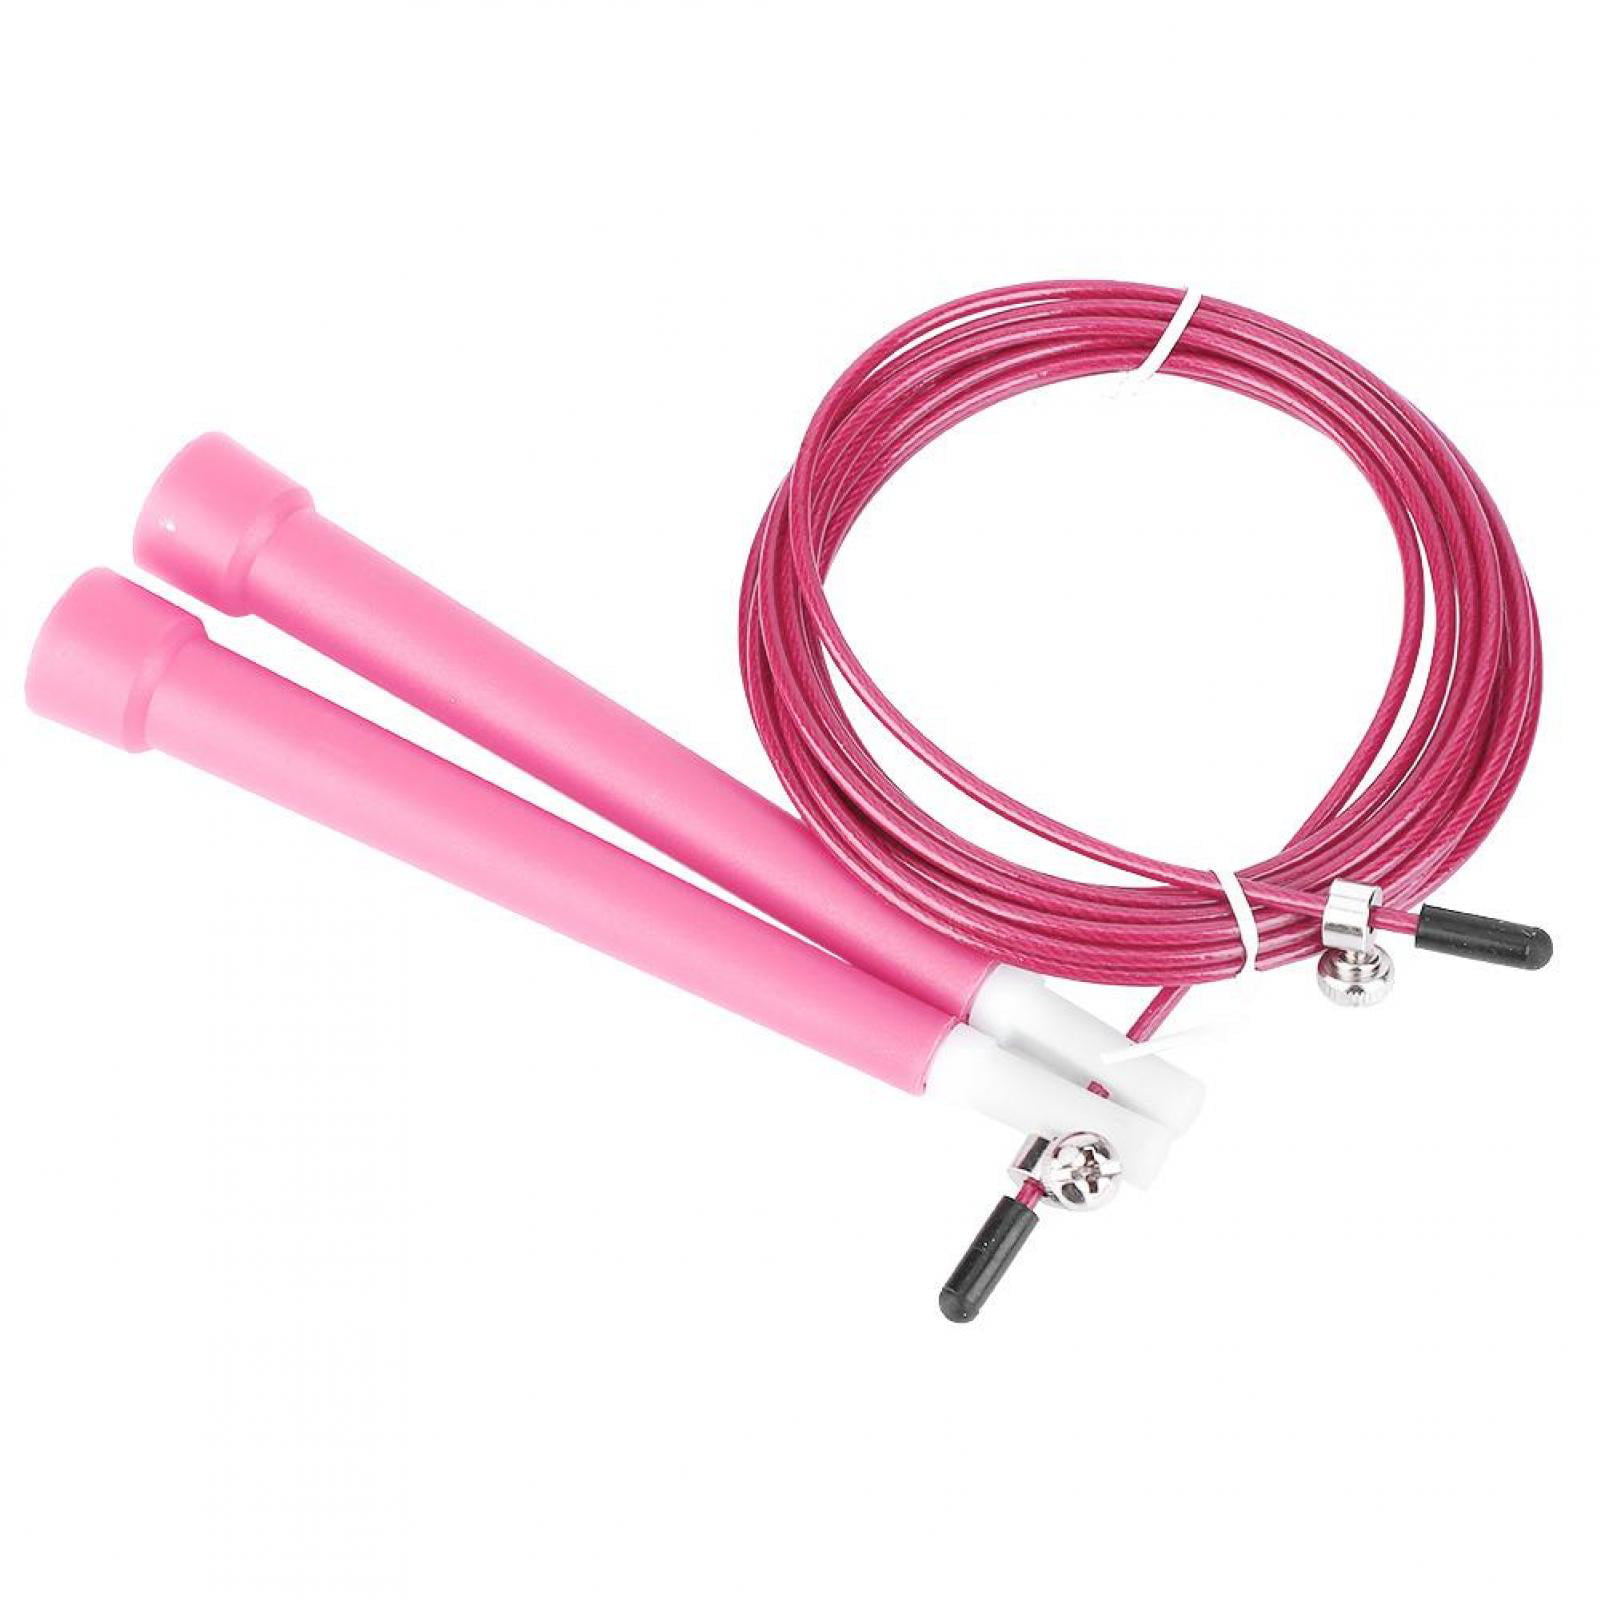 New Adjustable Ultra Speed Steel Cable Wire Skipping Skip Jump Crossfit Rope 